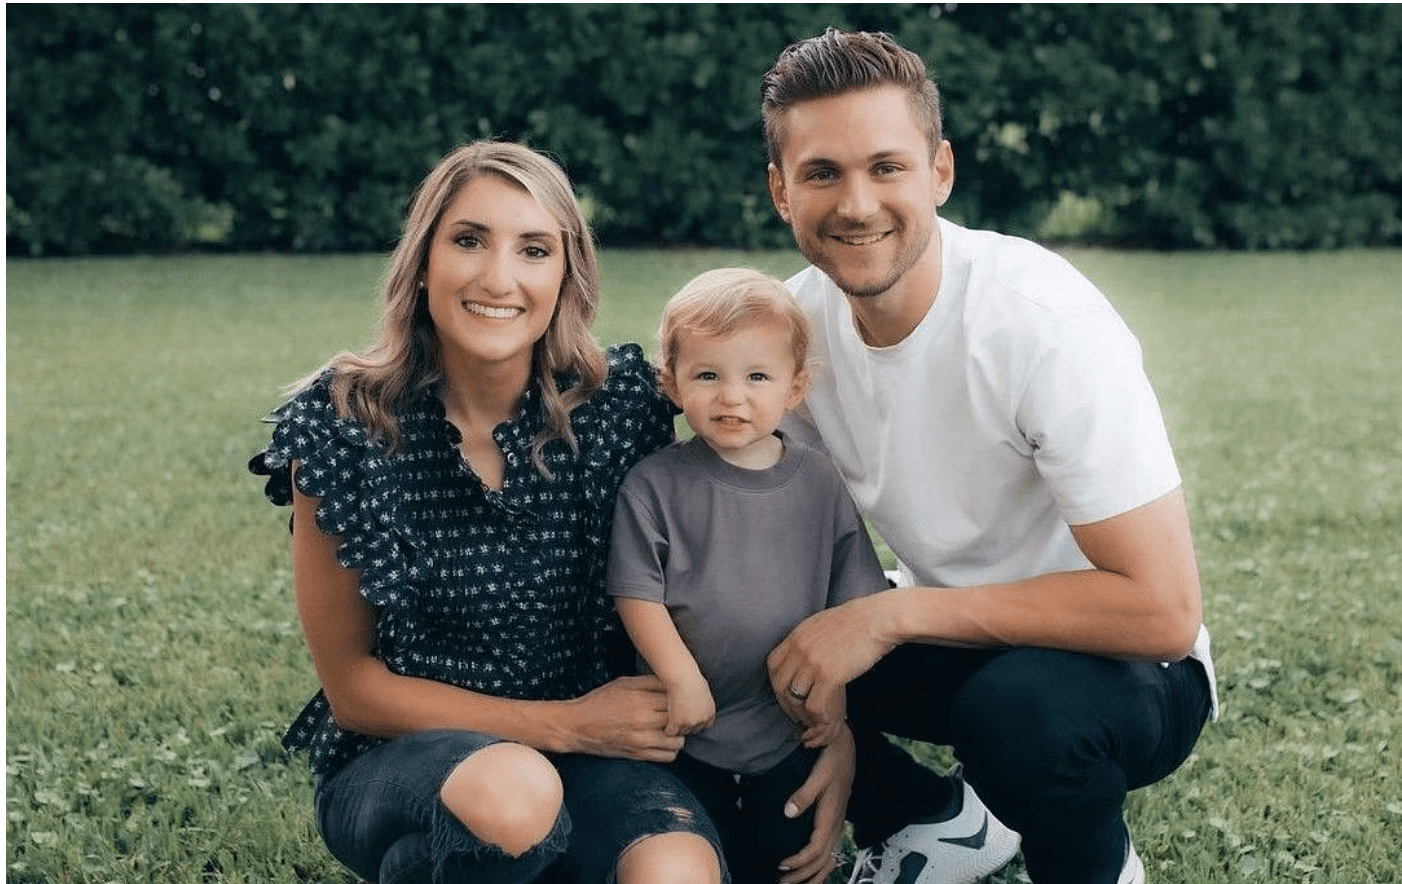 Trea Turner net worth, age, height, wife, career, biography and latest updates